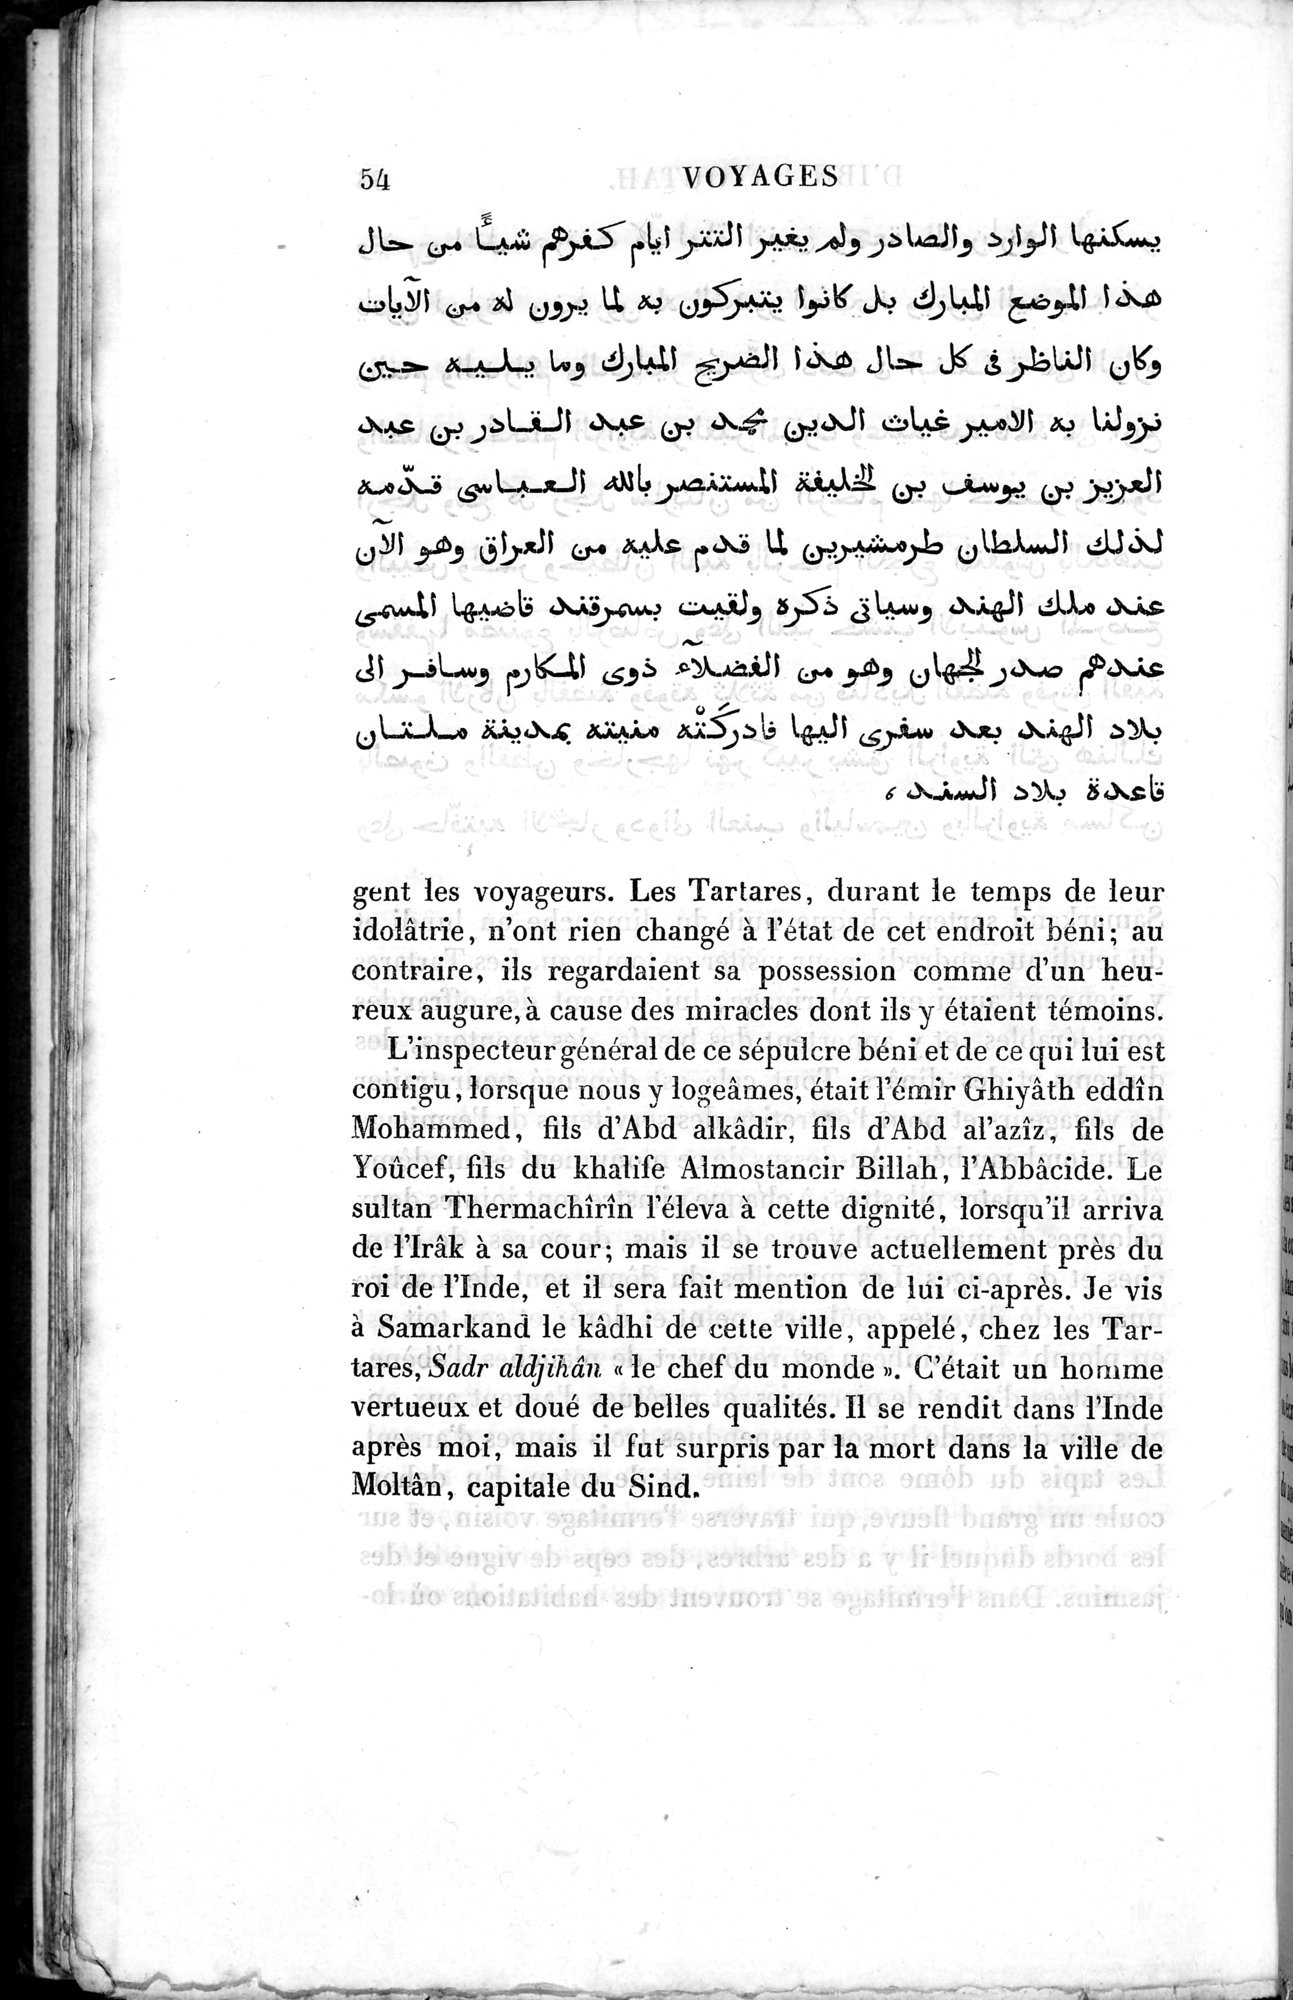 Voyages d'Ibn Batoutah : vol.3 / Page 94 (Grayscale High Resolution Image)